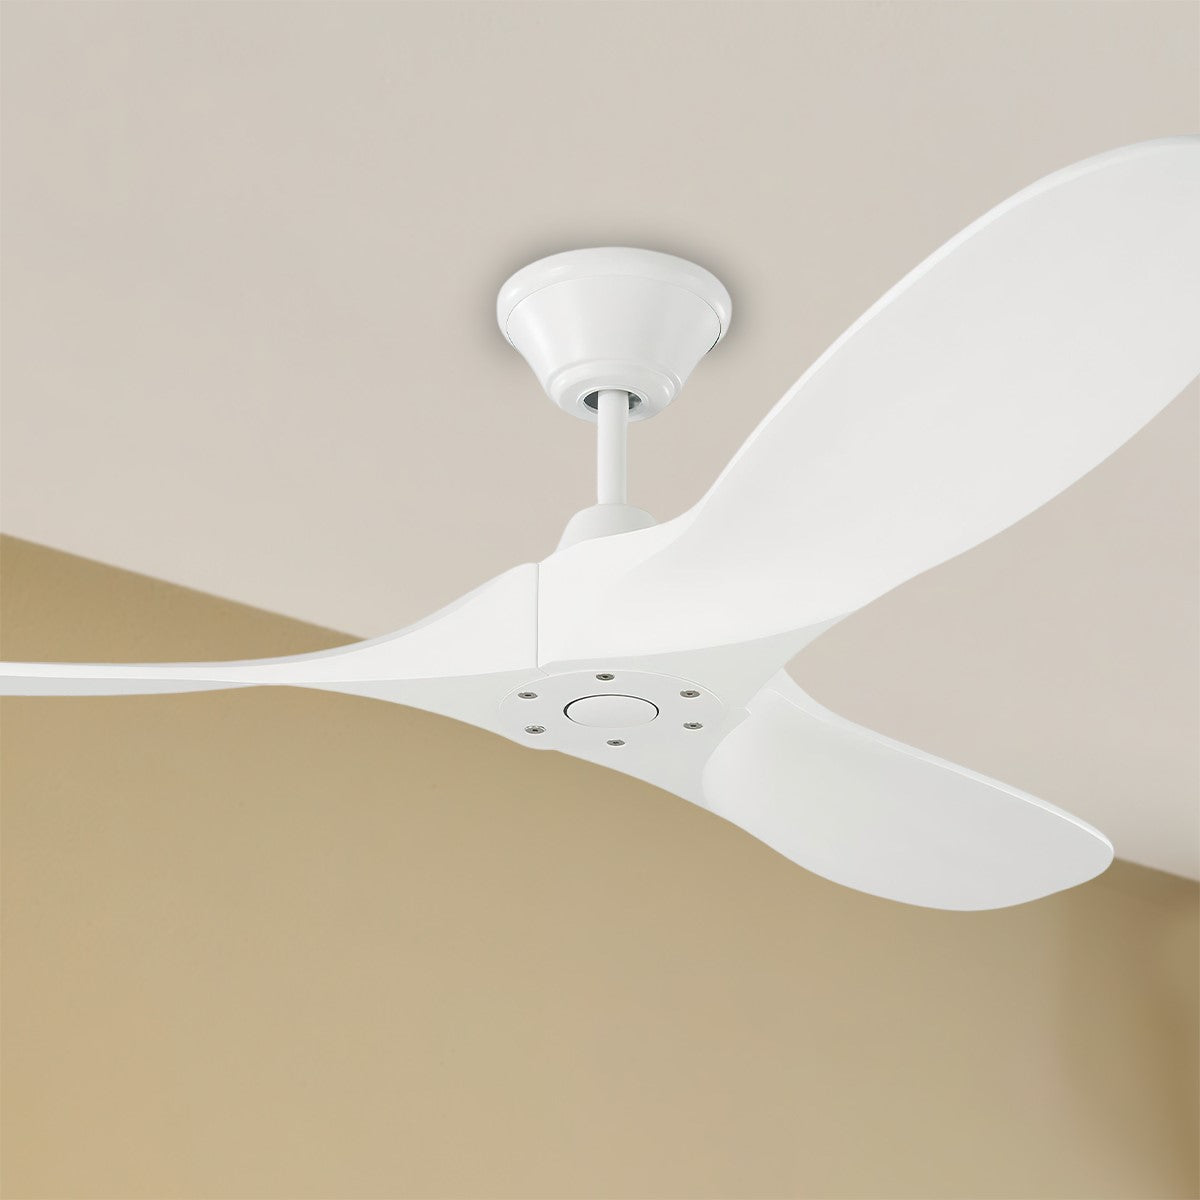 Maverick II 52 Inch Propeller Outdoor Ceiling Fan With Remote